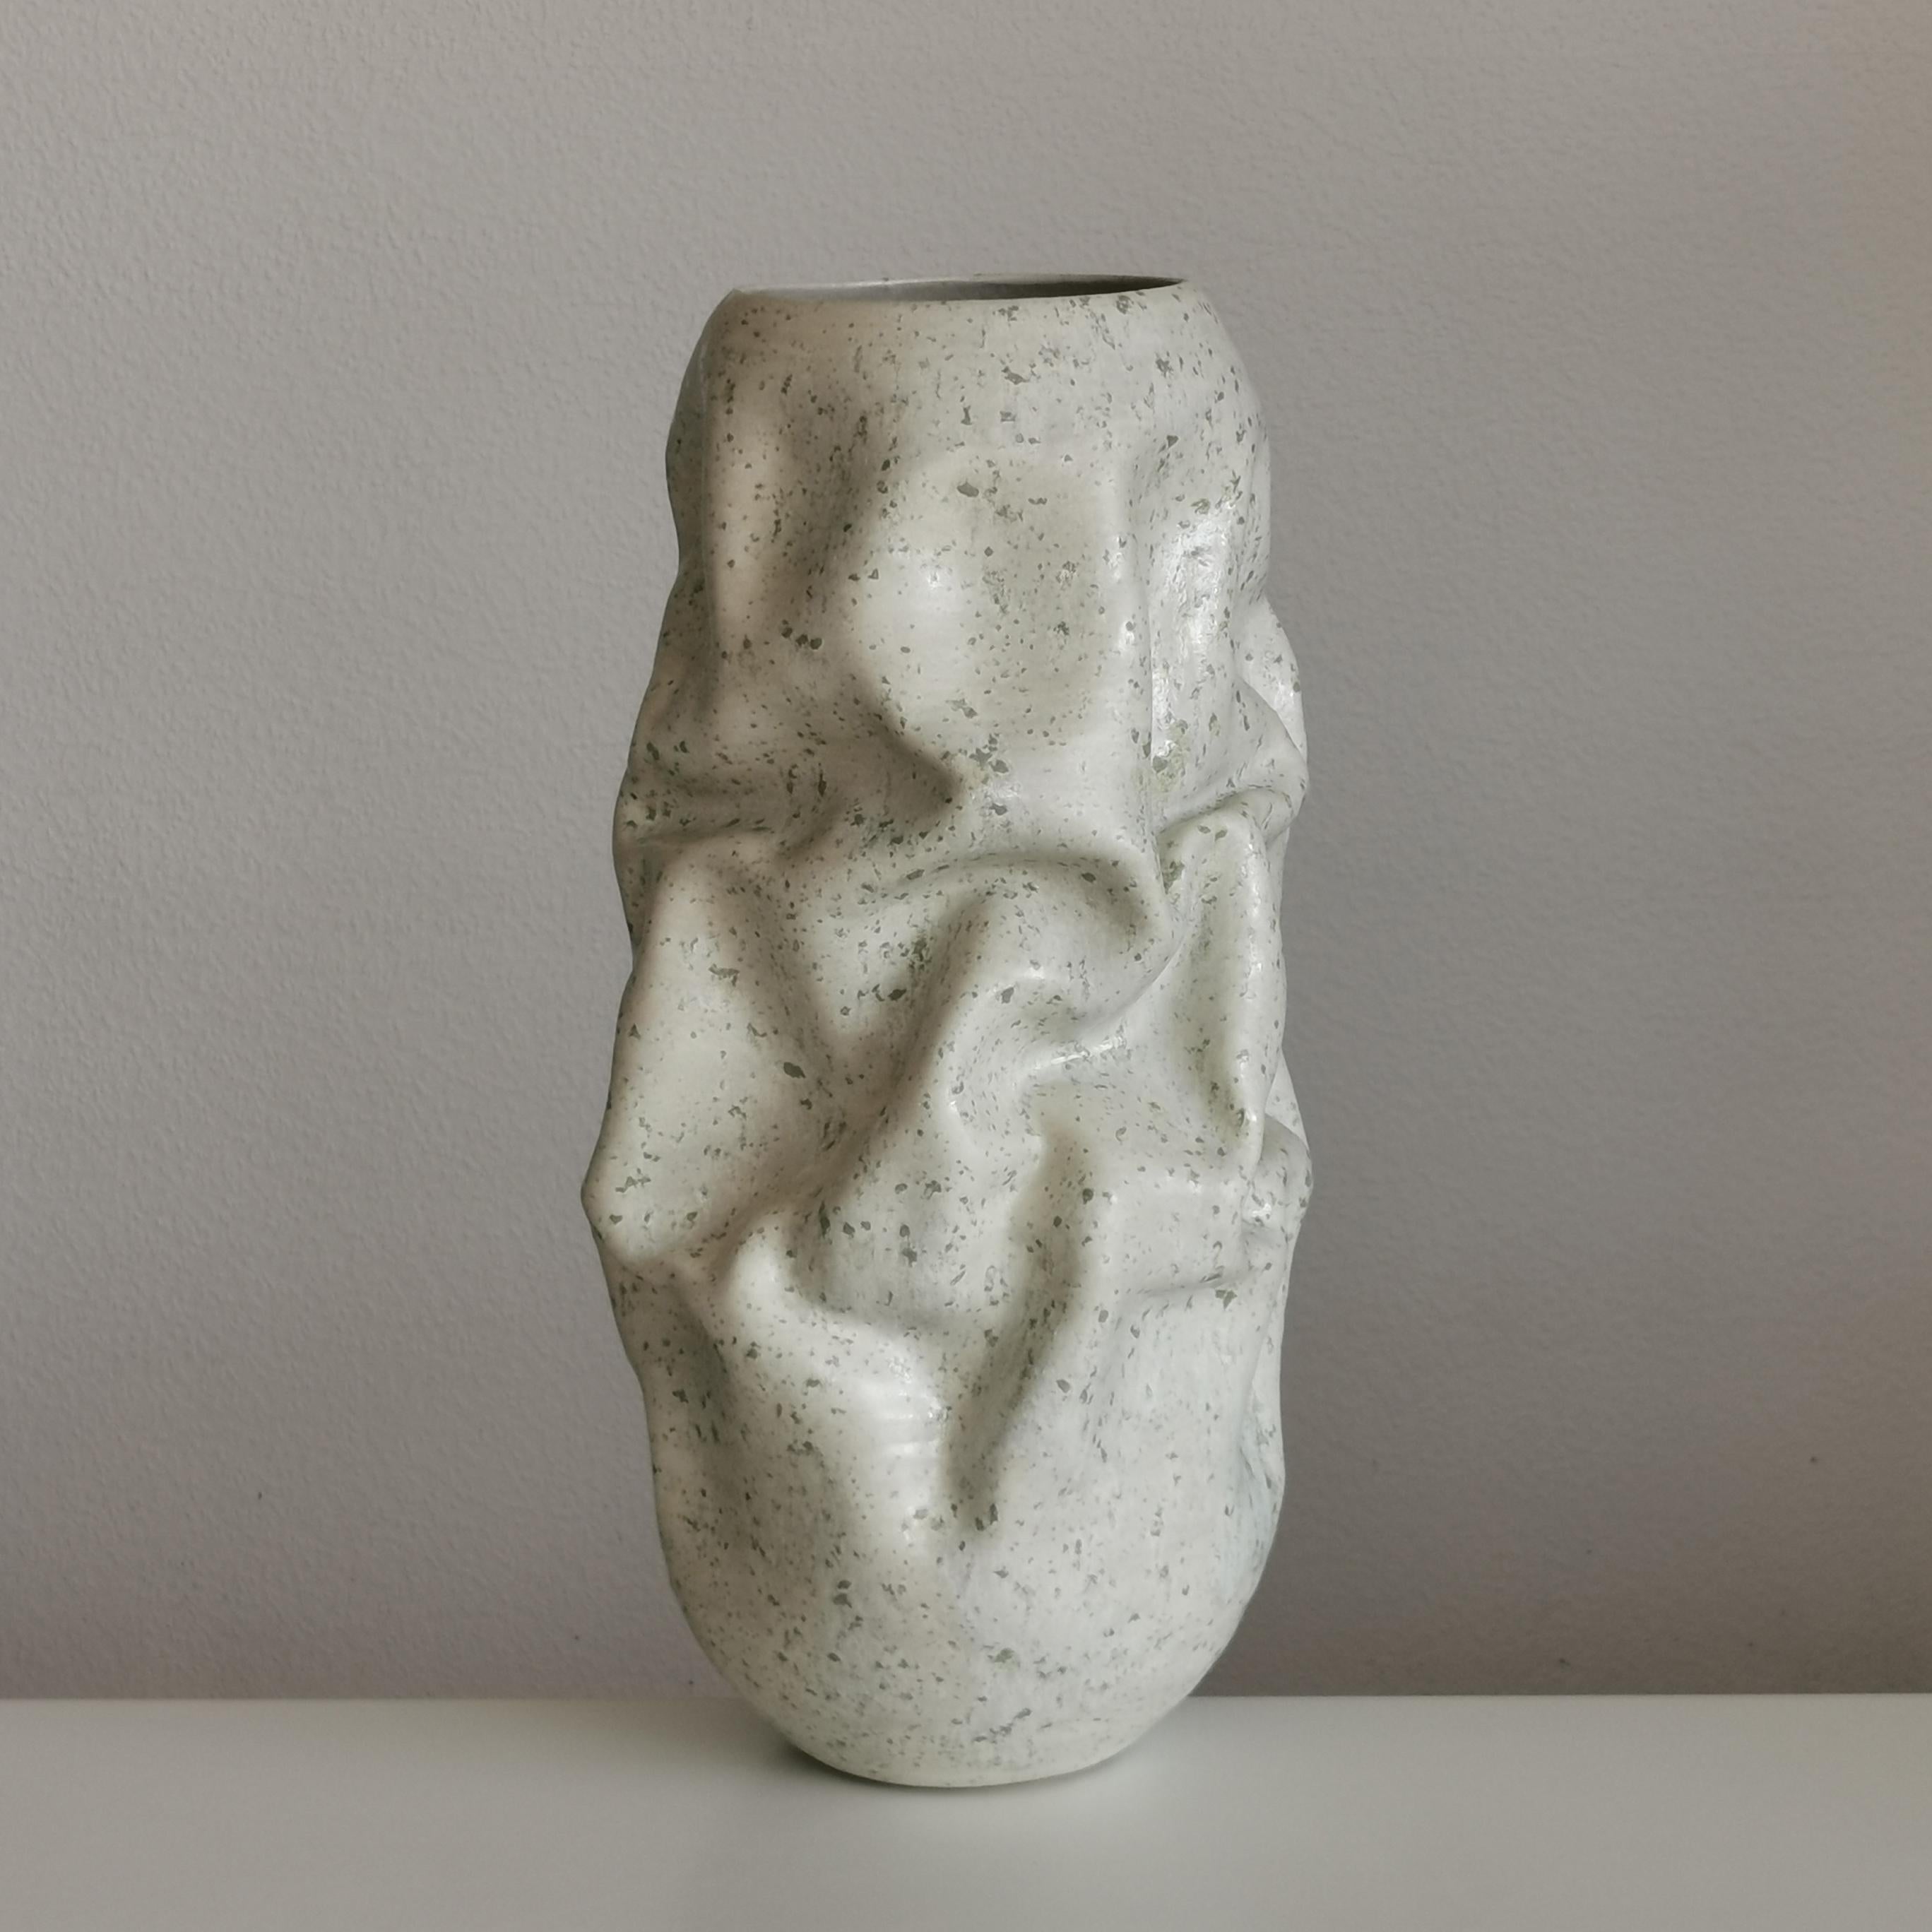 Contemporary Medium White Crumpled Form, Green Chrystals, Vessel No.128, Ceramic Sculpture For Sale